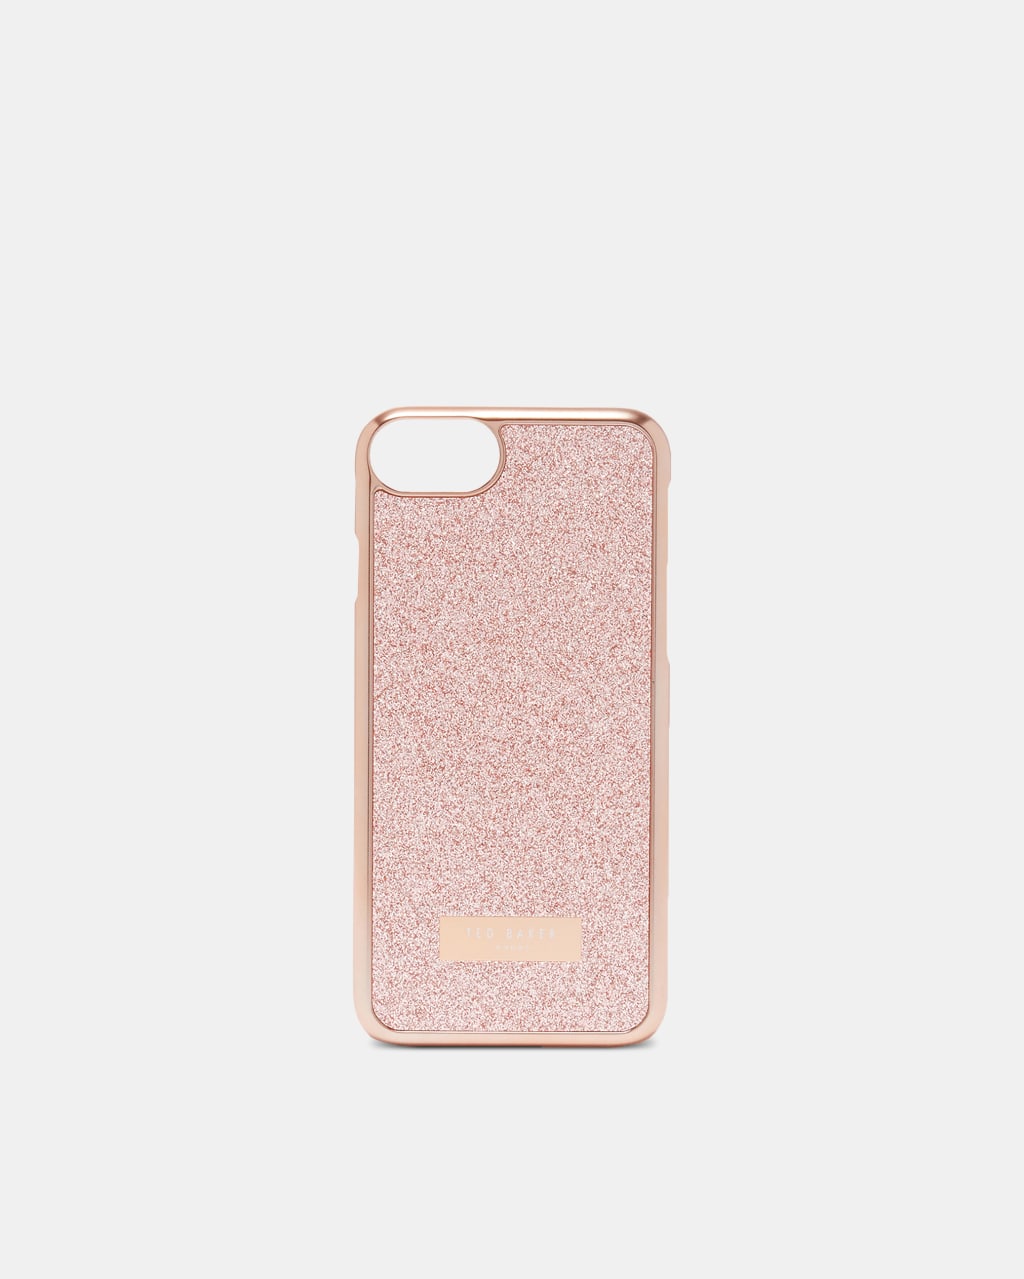 Glitter Iphone 6 6s 7 8 Case Baby Pink Accessories Ted Baker Row